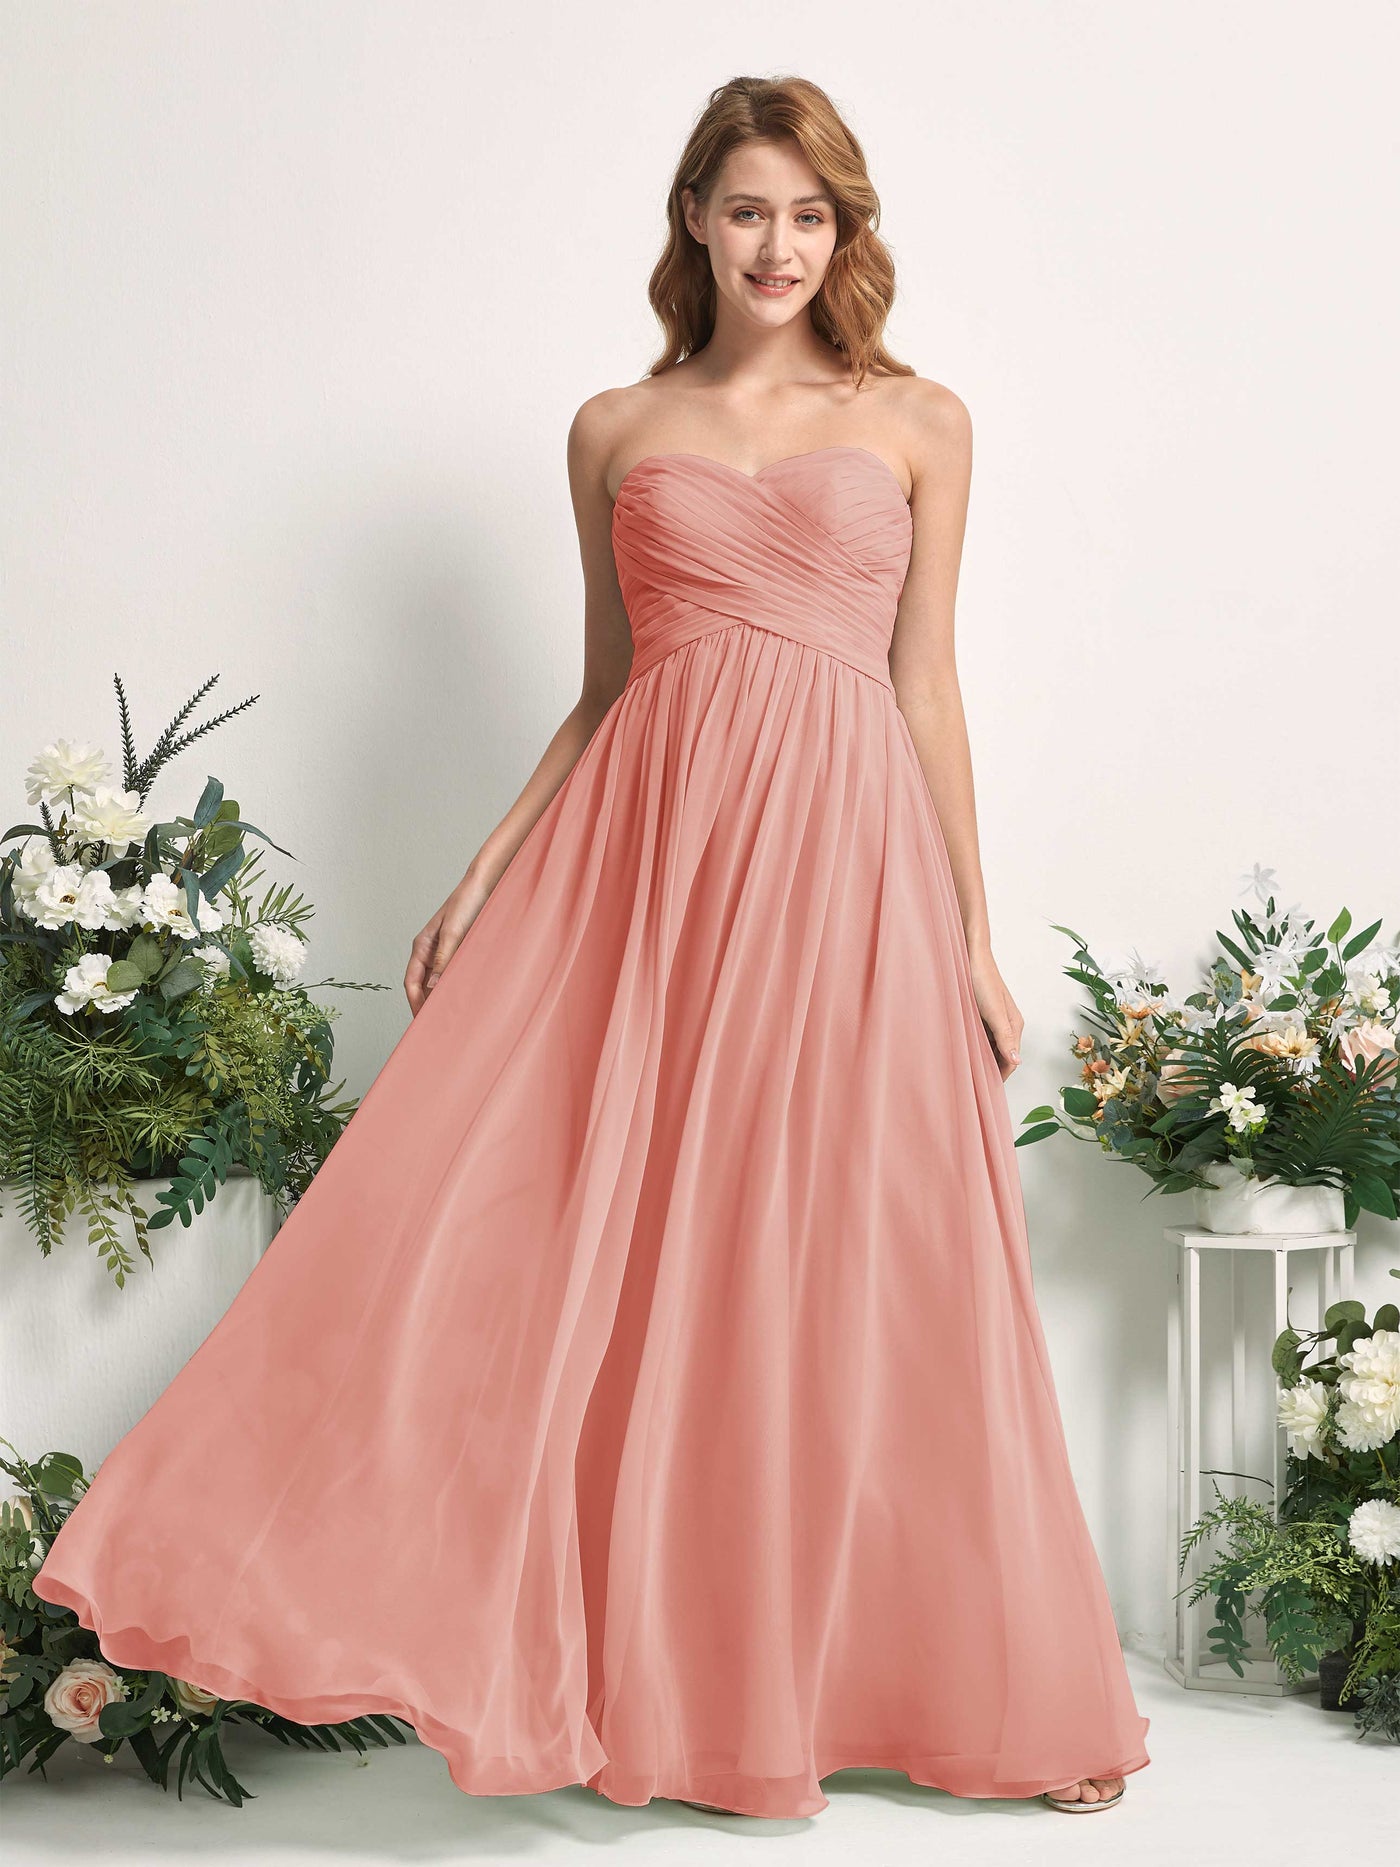 Bridesmaid Dress A-line Chiffon Sweetheart Full Length Sleeveless Wedding Party Dress - Champagne Rose (81226906)#color_champagne-rose